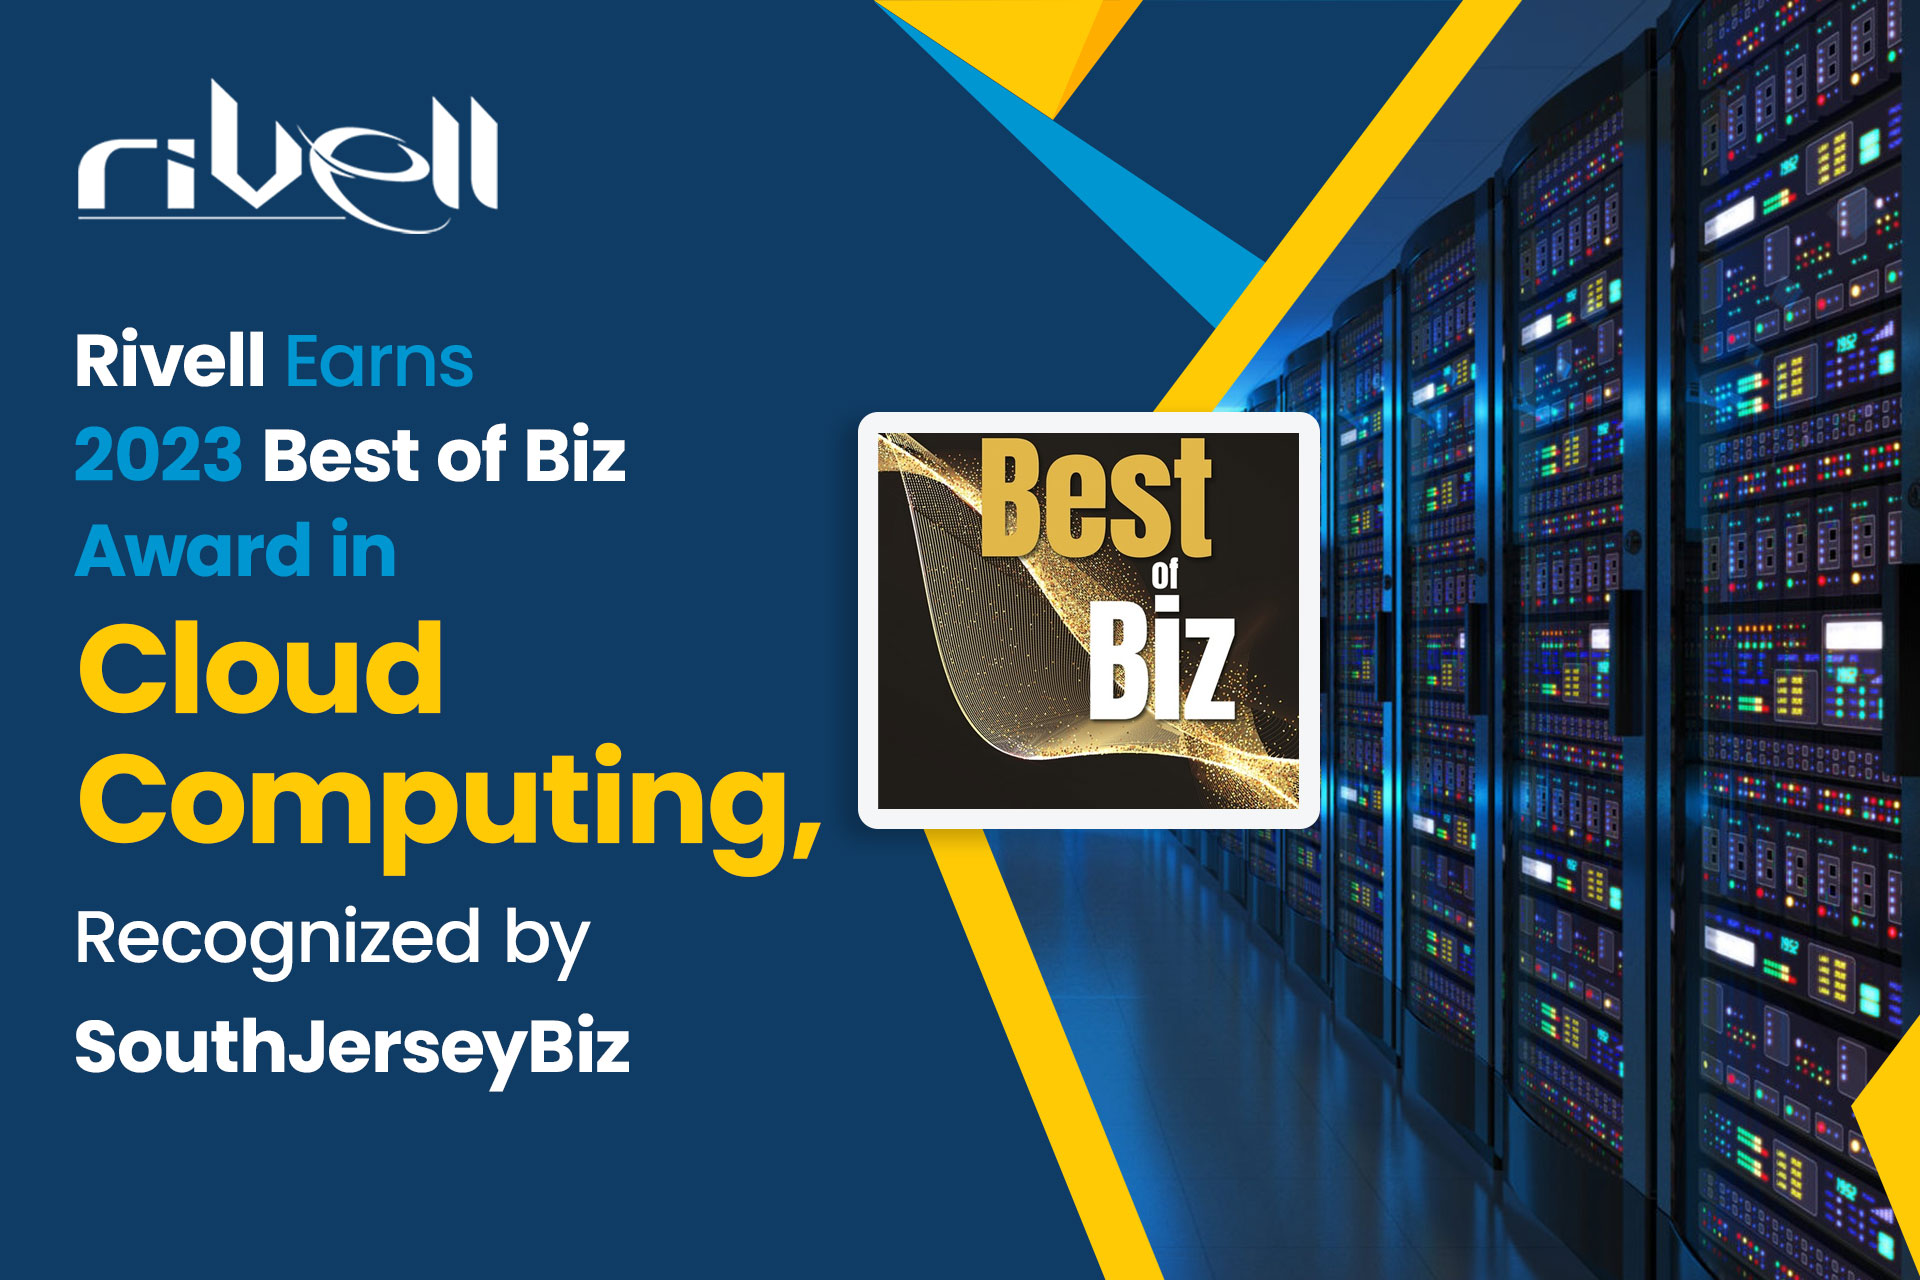 Rivell Earns 2023 Best of Biz Award in Cloud Computing, Recognized by SouthJerseyBiz